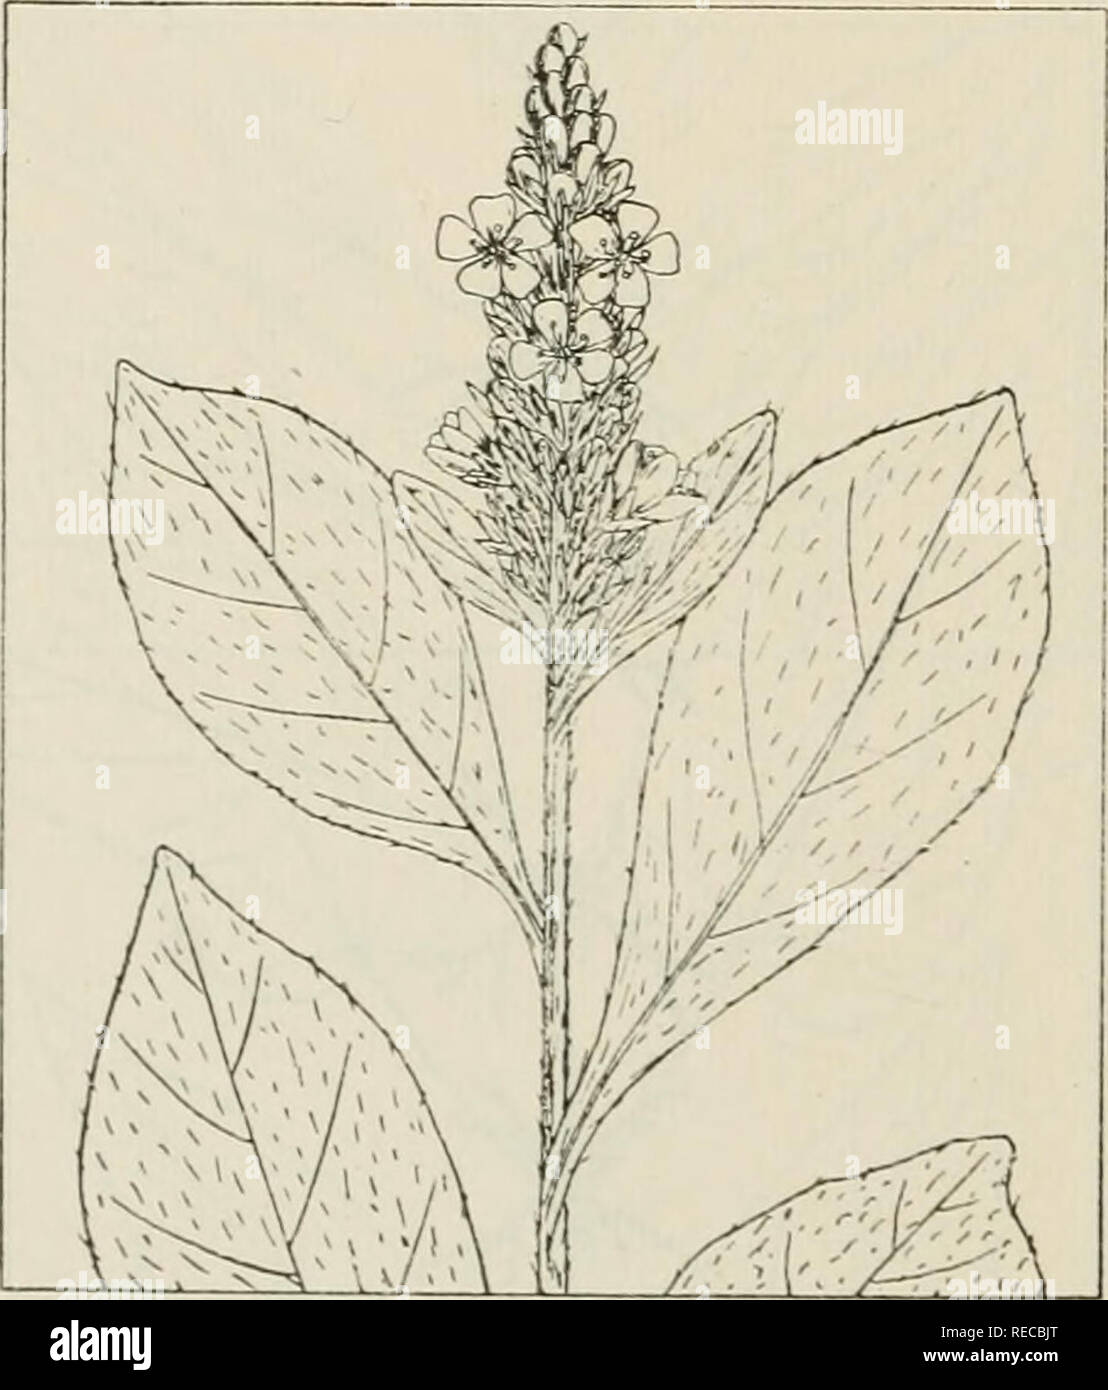 . The drug plants of Illinois. Botany, Medical; Botany. USTILAGO ZEAE. Corn smut. Usti- laginaceae.—A fungus parasite on Indian corn {Zea mays L.) appearing as large masses or galls of black, sooty powder on the ears, stem nodes, and tassels, and small to large pustules on all other parts of the plant. The large galls from the ears, stems, and tassels are collected. Abundant in cornfields throughout the state. Contains resins, mazenic acid, and the alkaloid ustalagine. Used as an ecbolic and antihemorrhagic. VALERIANA OFFICINALIS L. Heliotrope, common valerian, garden heliotrope. Valerianaceae Stock Photo